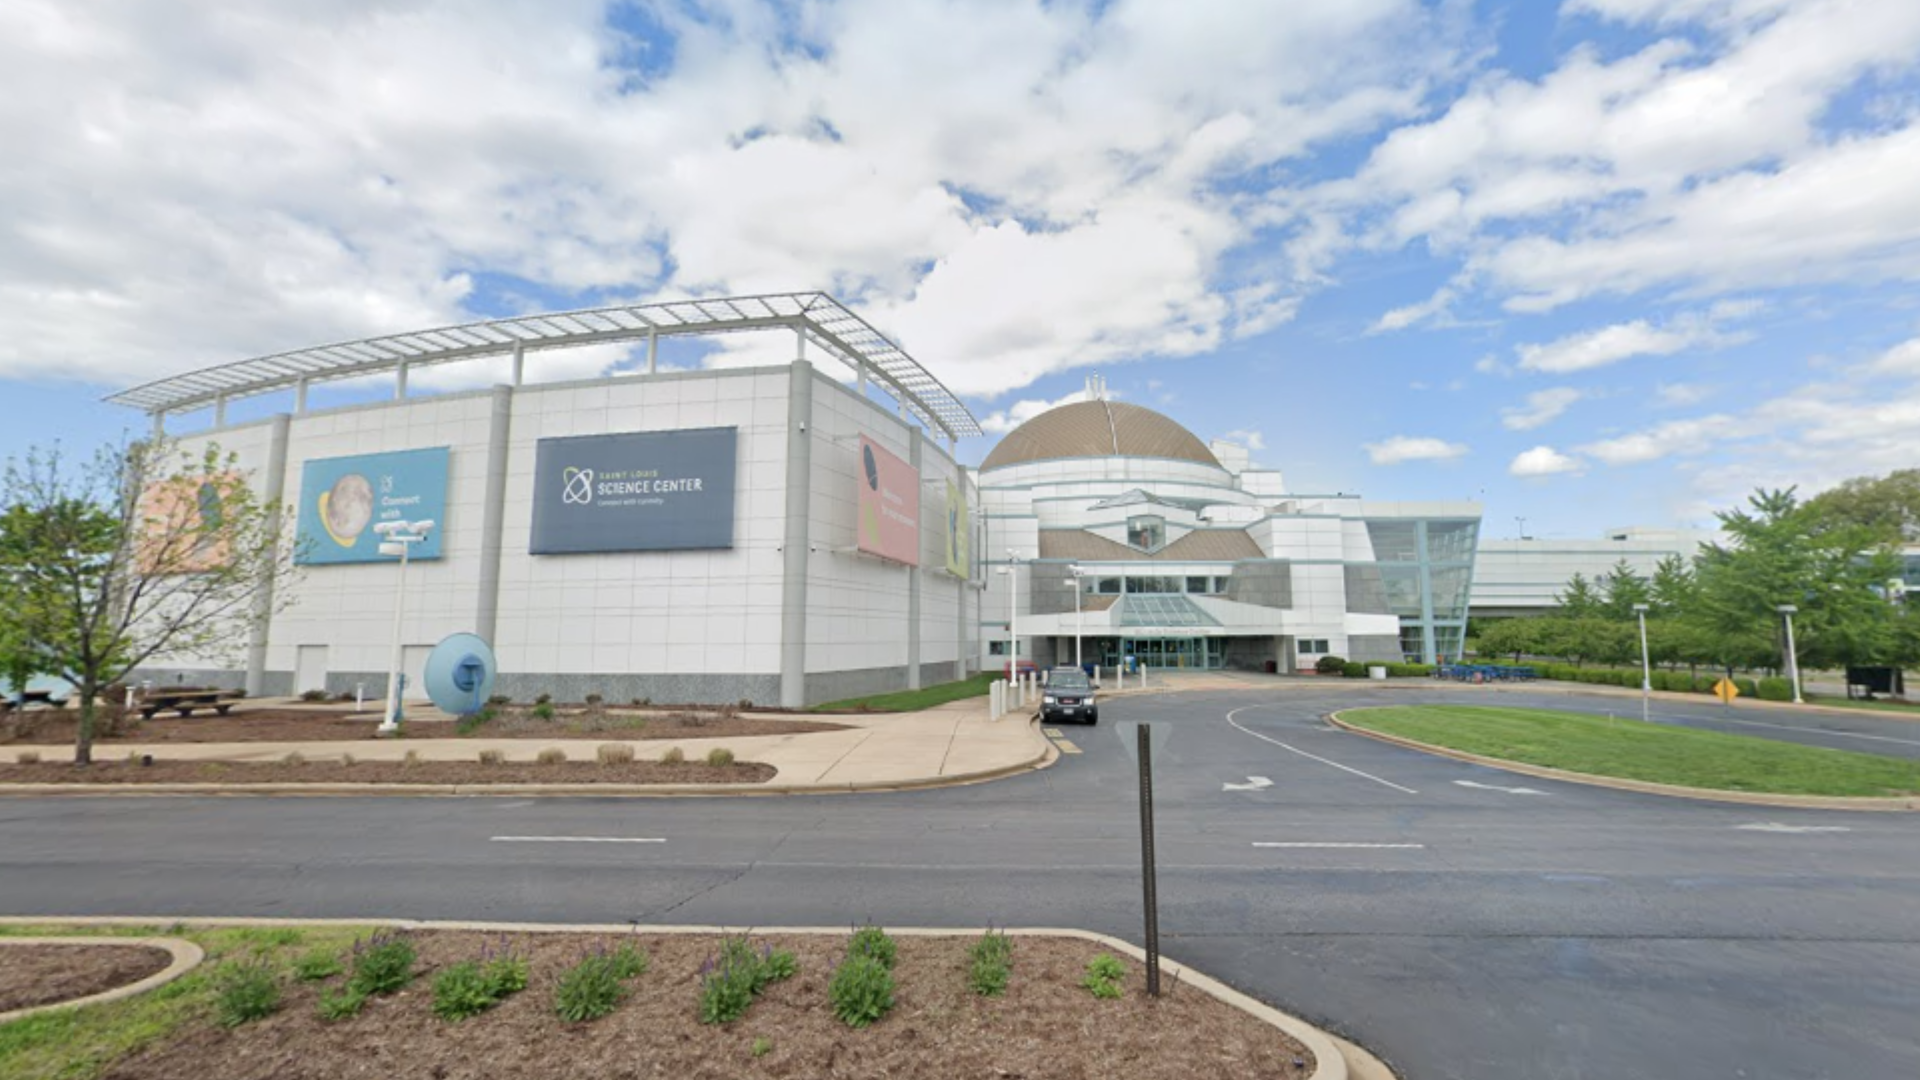 The Saint Louis Science Center will reopen on June 20, under new safety measures and operating guidelines.